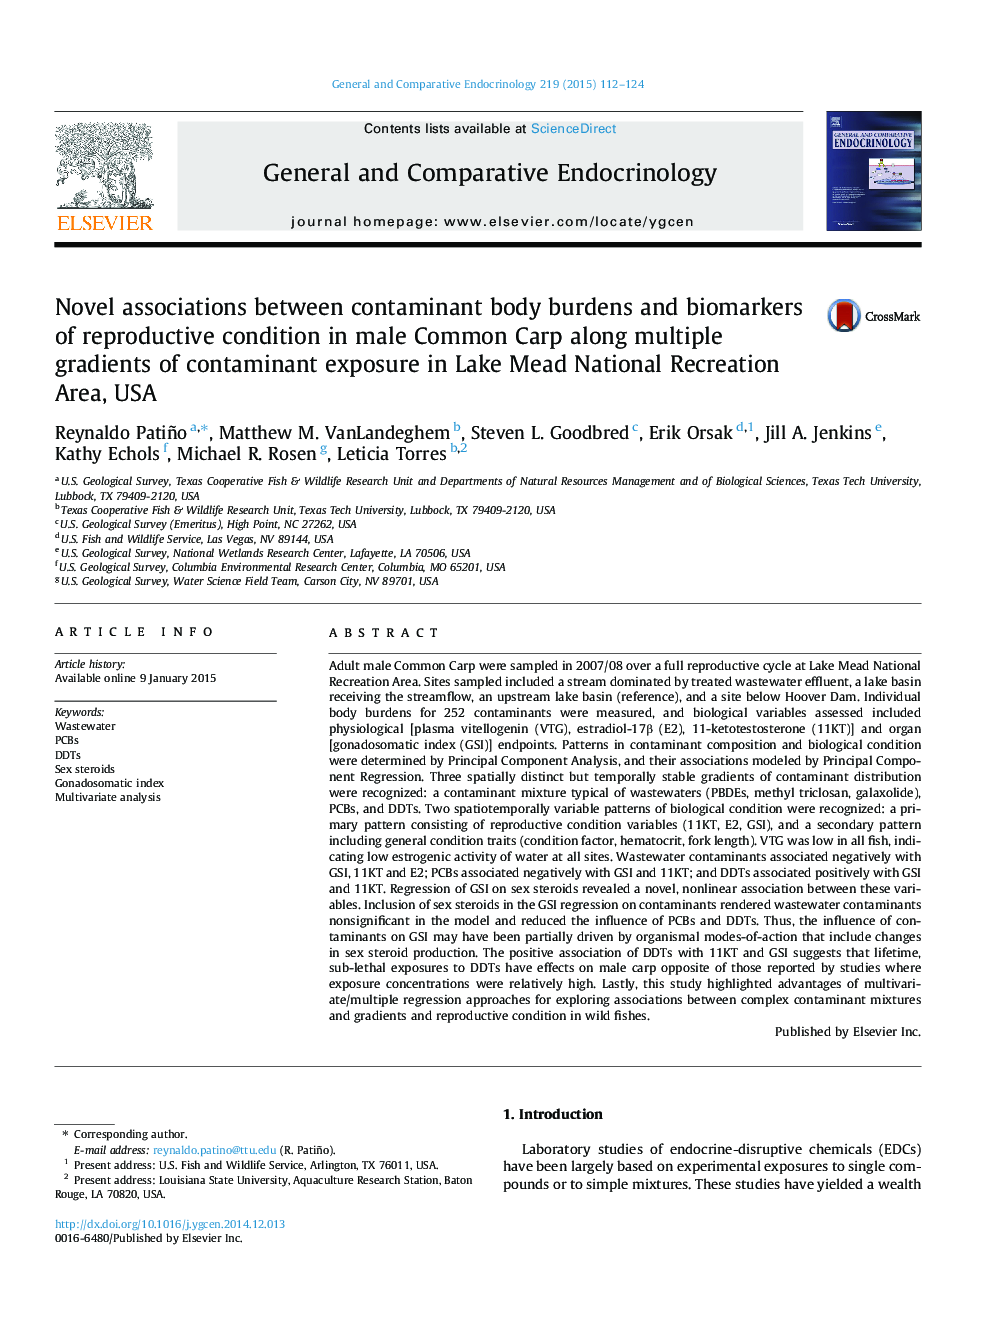 Novel associations between contaminant body burdens and biomarkers of reproductive condition in male Common Carp along multiple gradients of contaminant exposure in Lake Mead National Recreation Area, USA